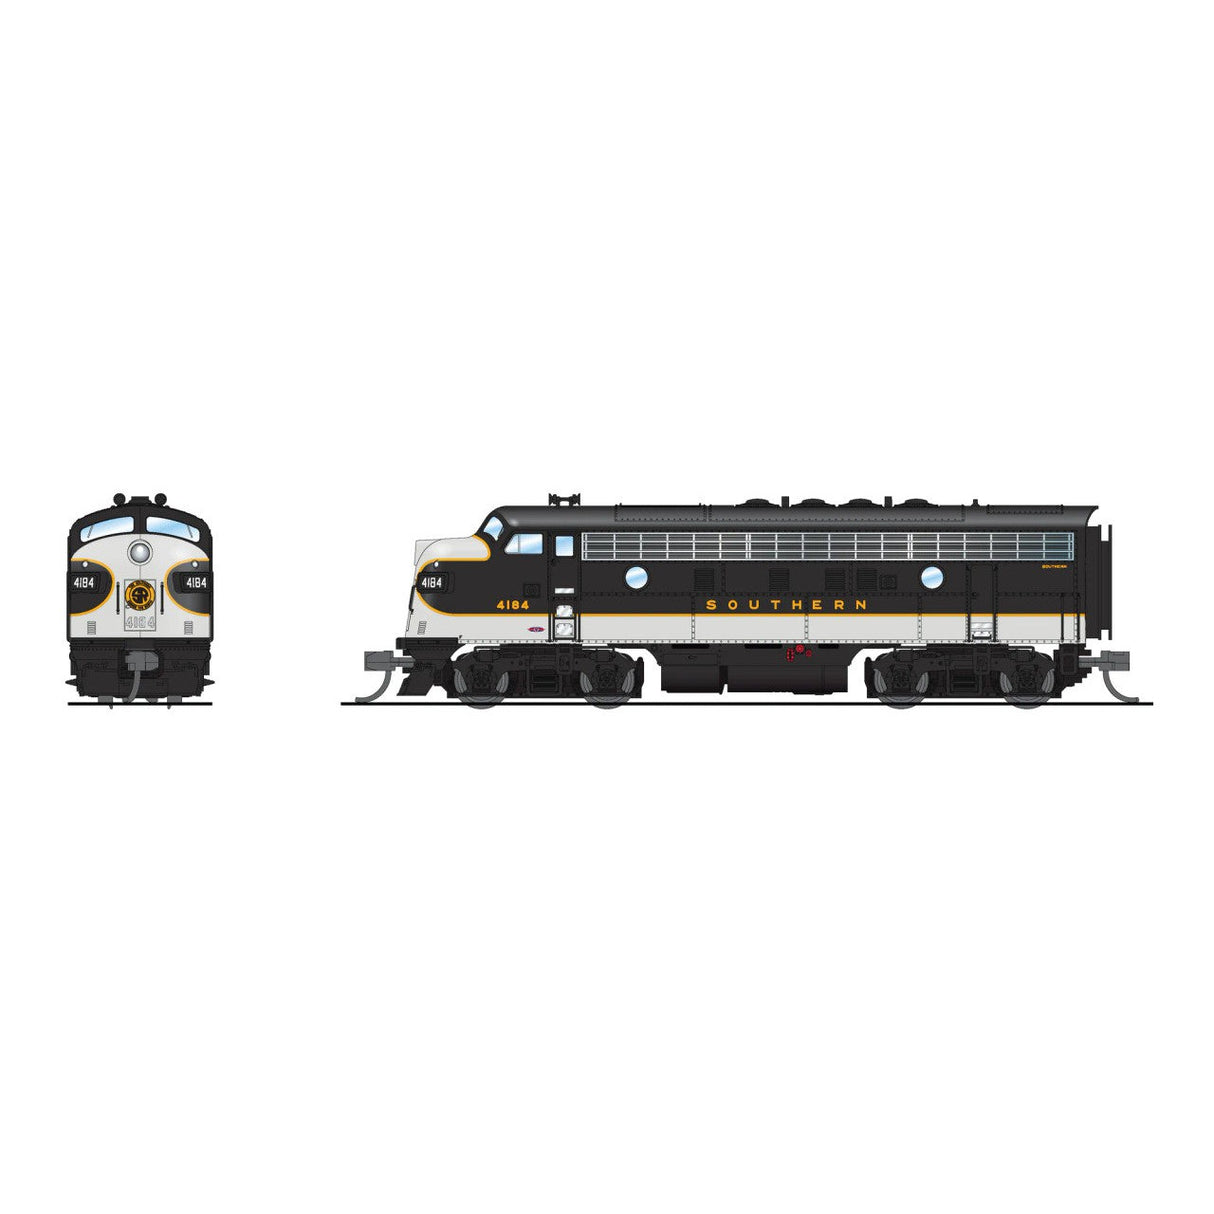 Broadway Limited N Scale Southern 4185  EMD F3A w/ Paragon4 Sound/DC/DCC